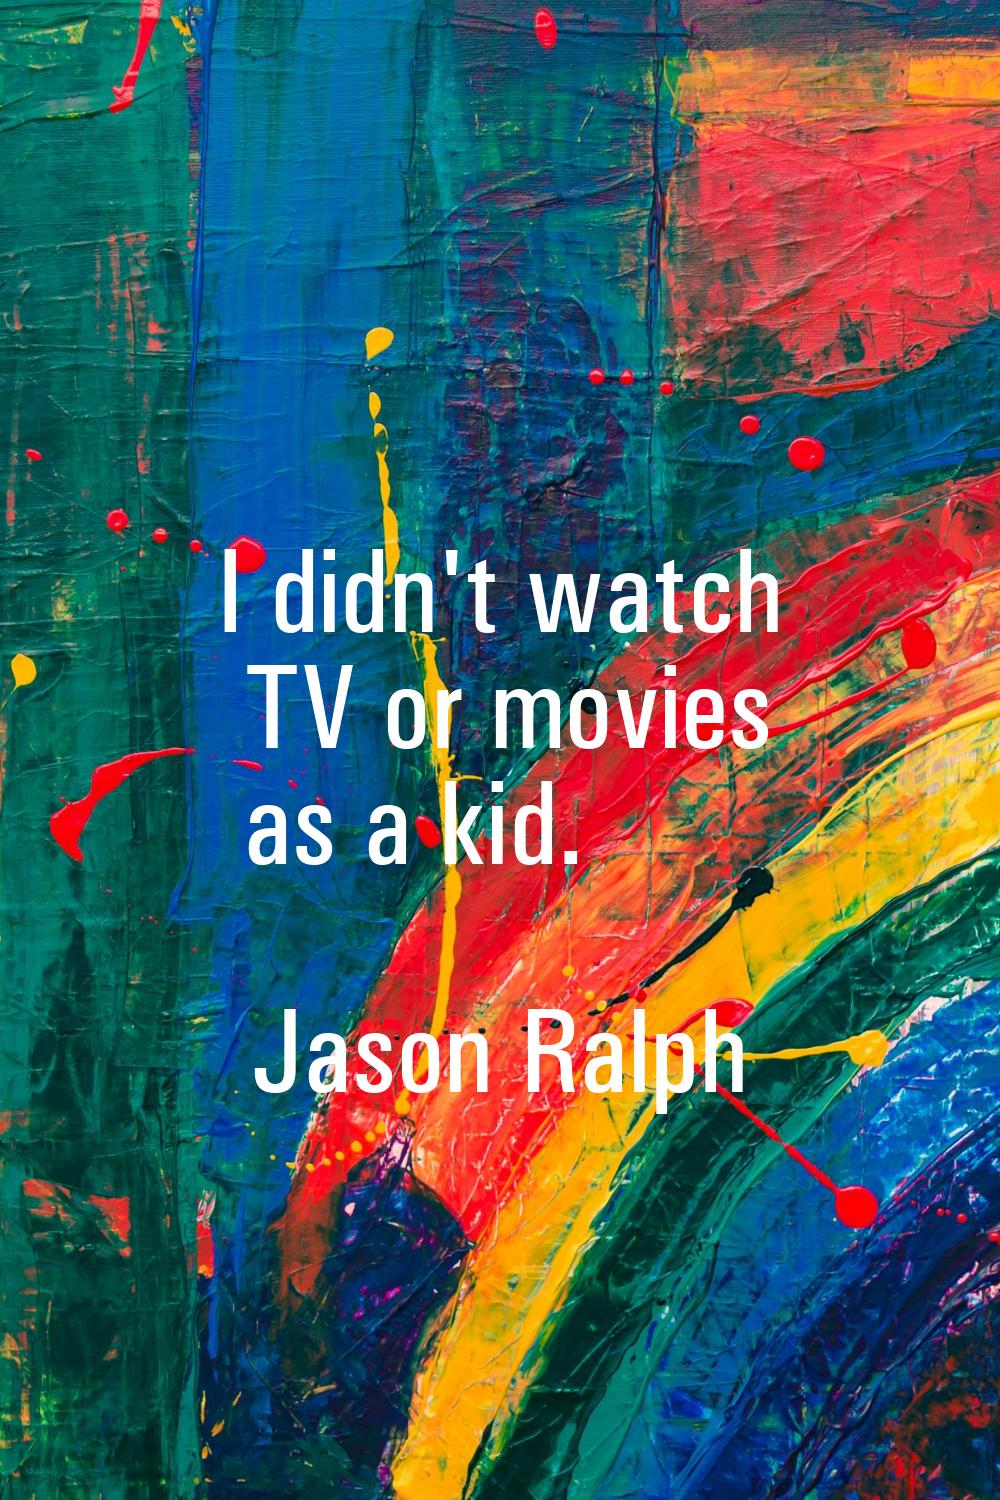 I didn't watch TV or movies as a kid.